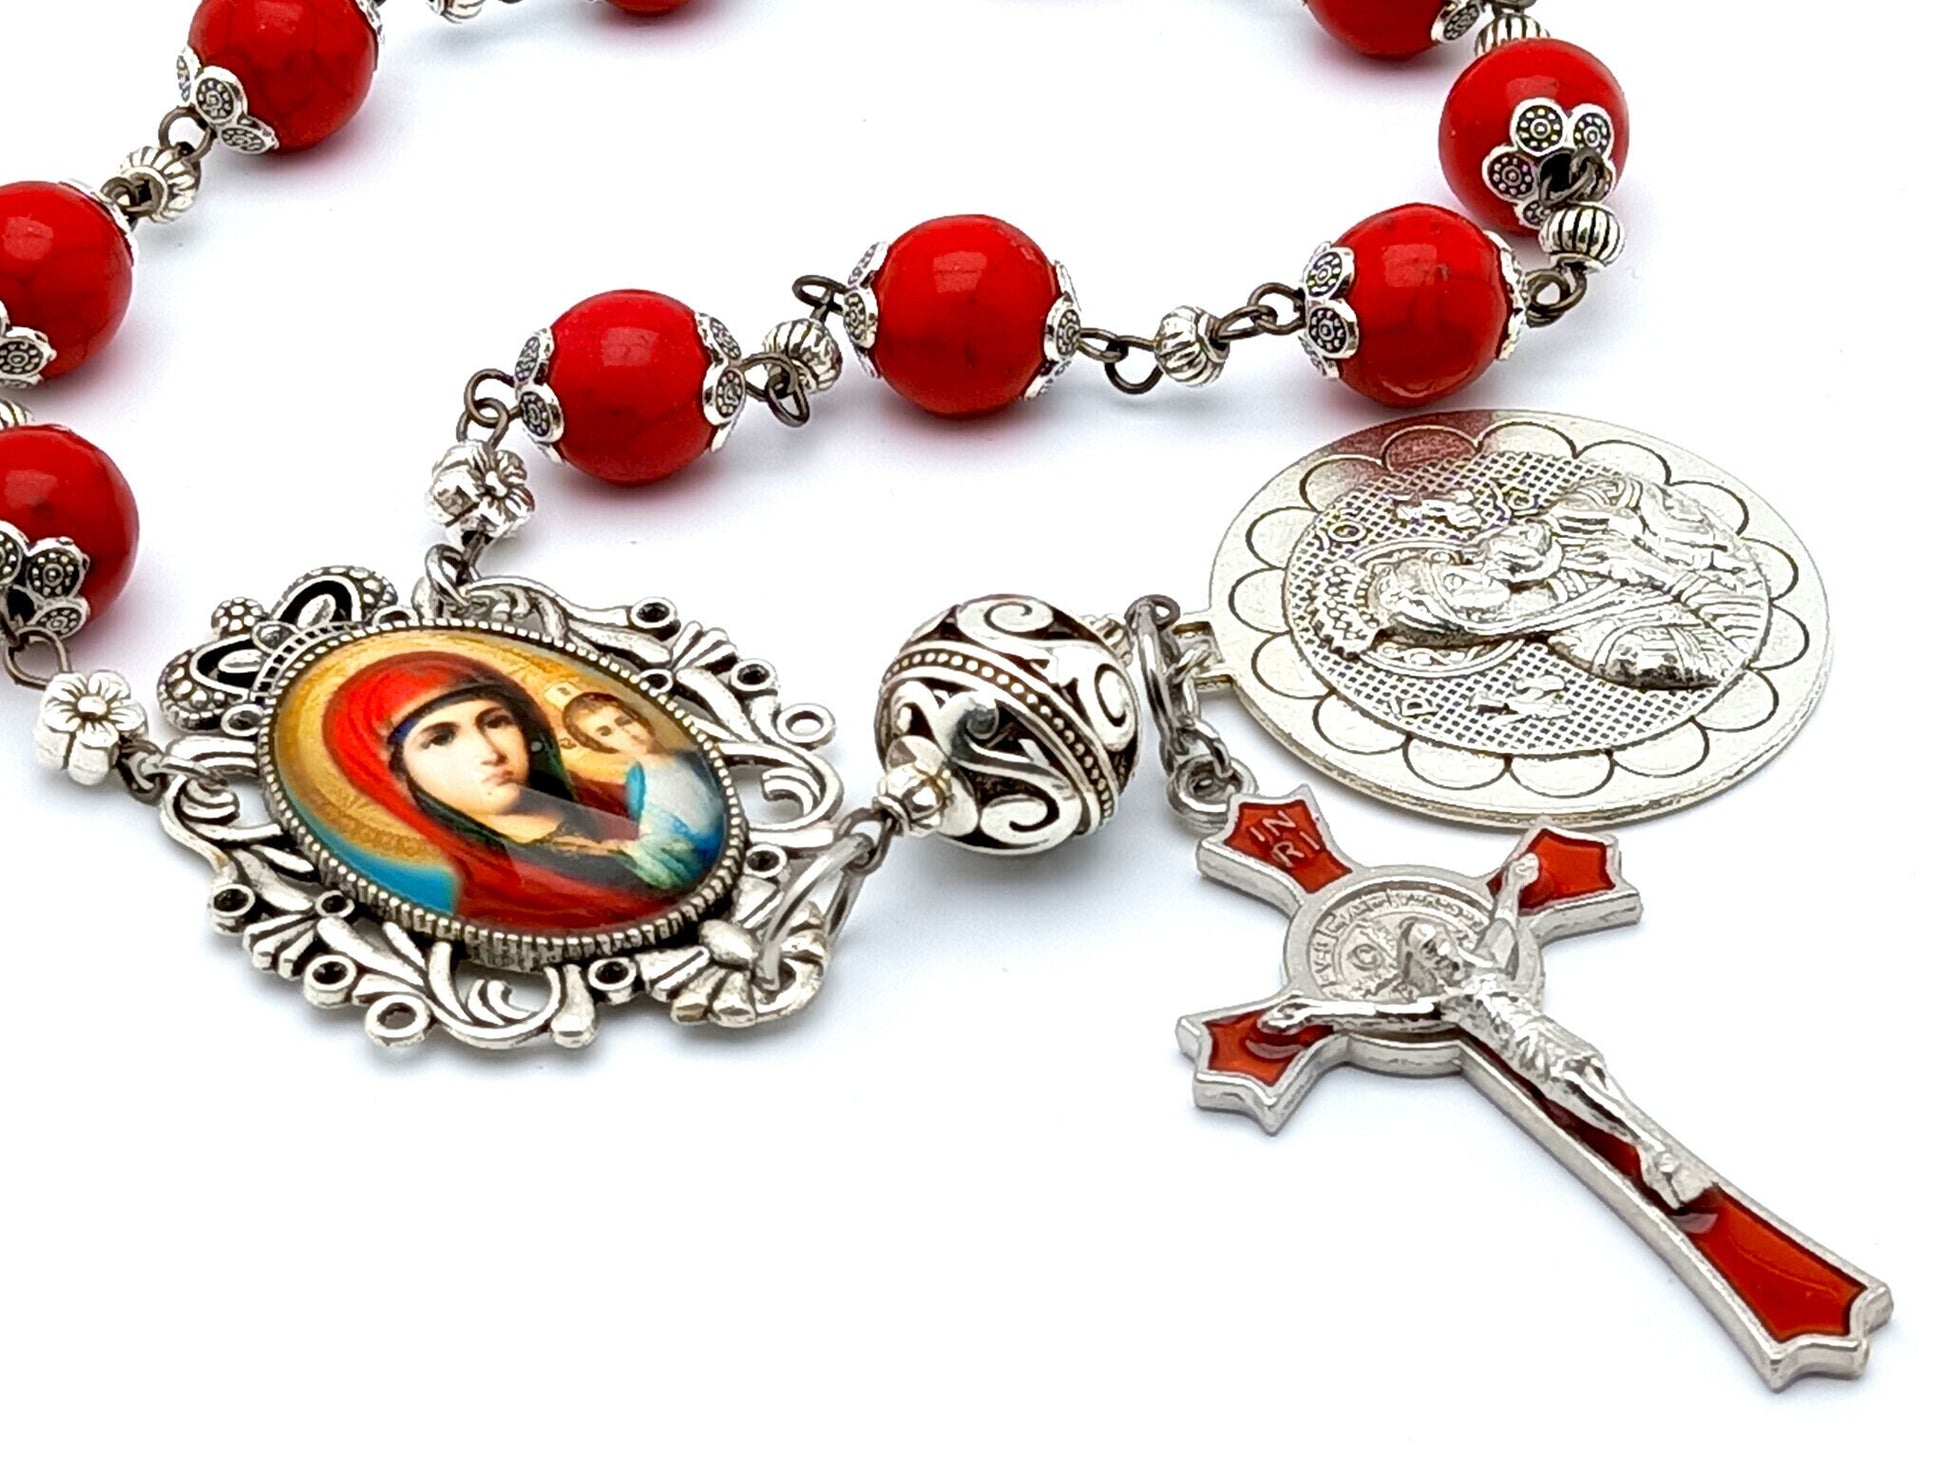 Our Lady of Perpetual Succor unique rosary beads single decade rosary with red gemstone beads, red enamel crucifix and picture centre medal.